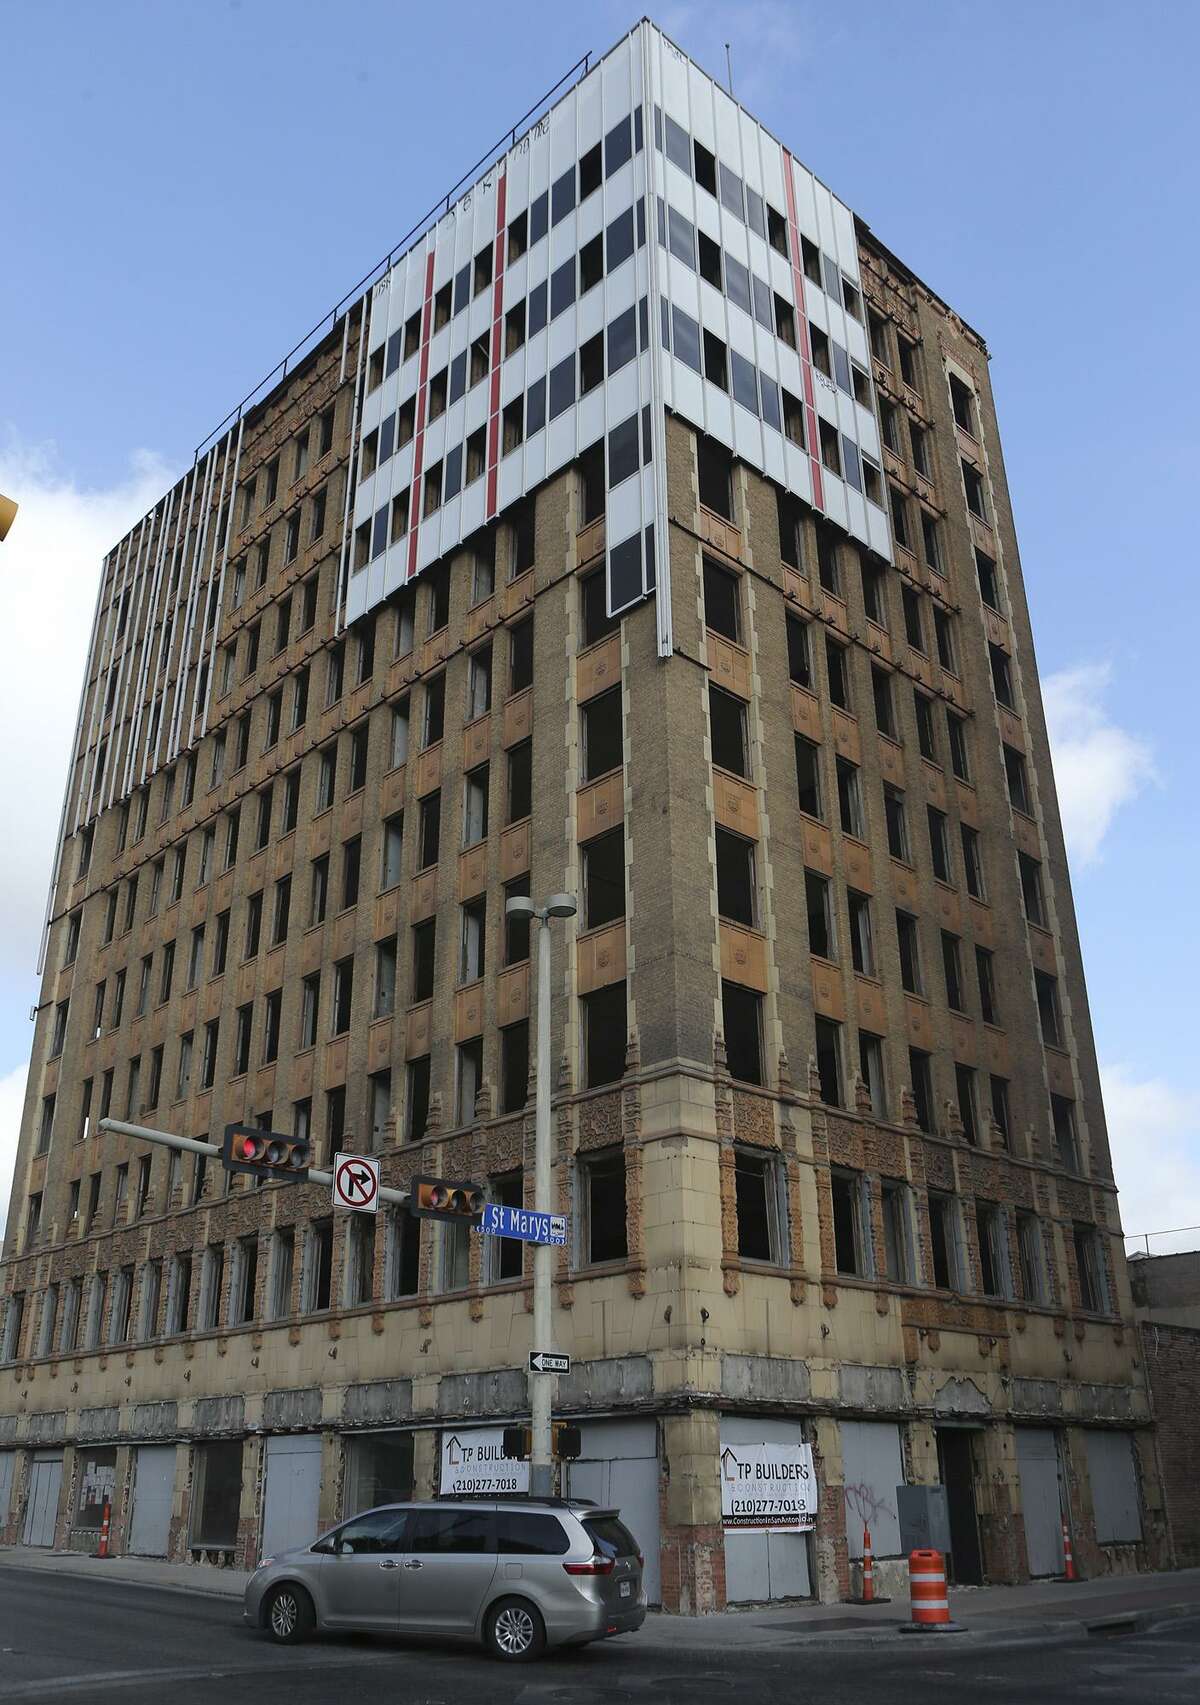 Workers have removed most of the 1960s aluminum cladding from the downtown Hedrick Building to reveal its 1928 limestone and terra cotta facade underneath.